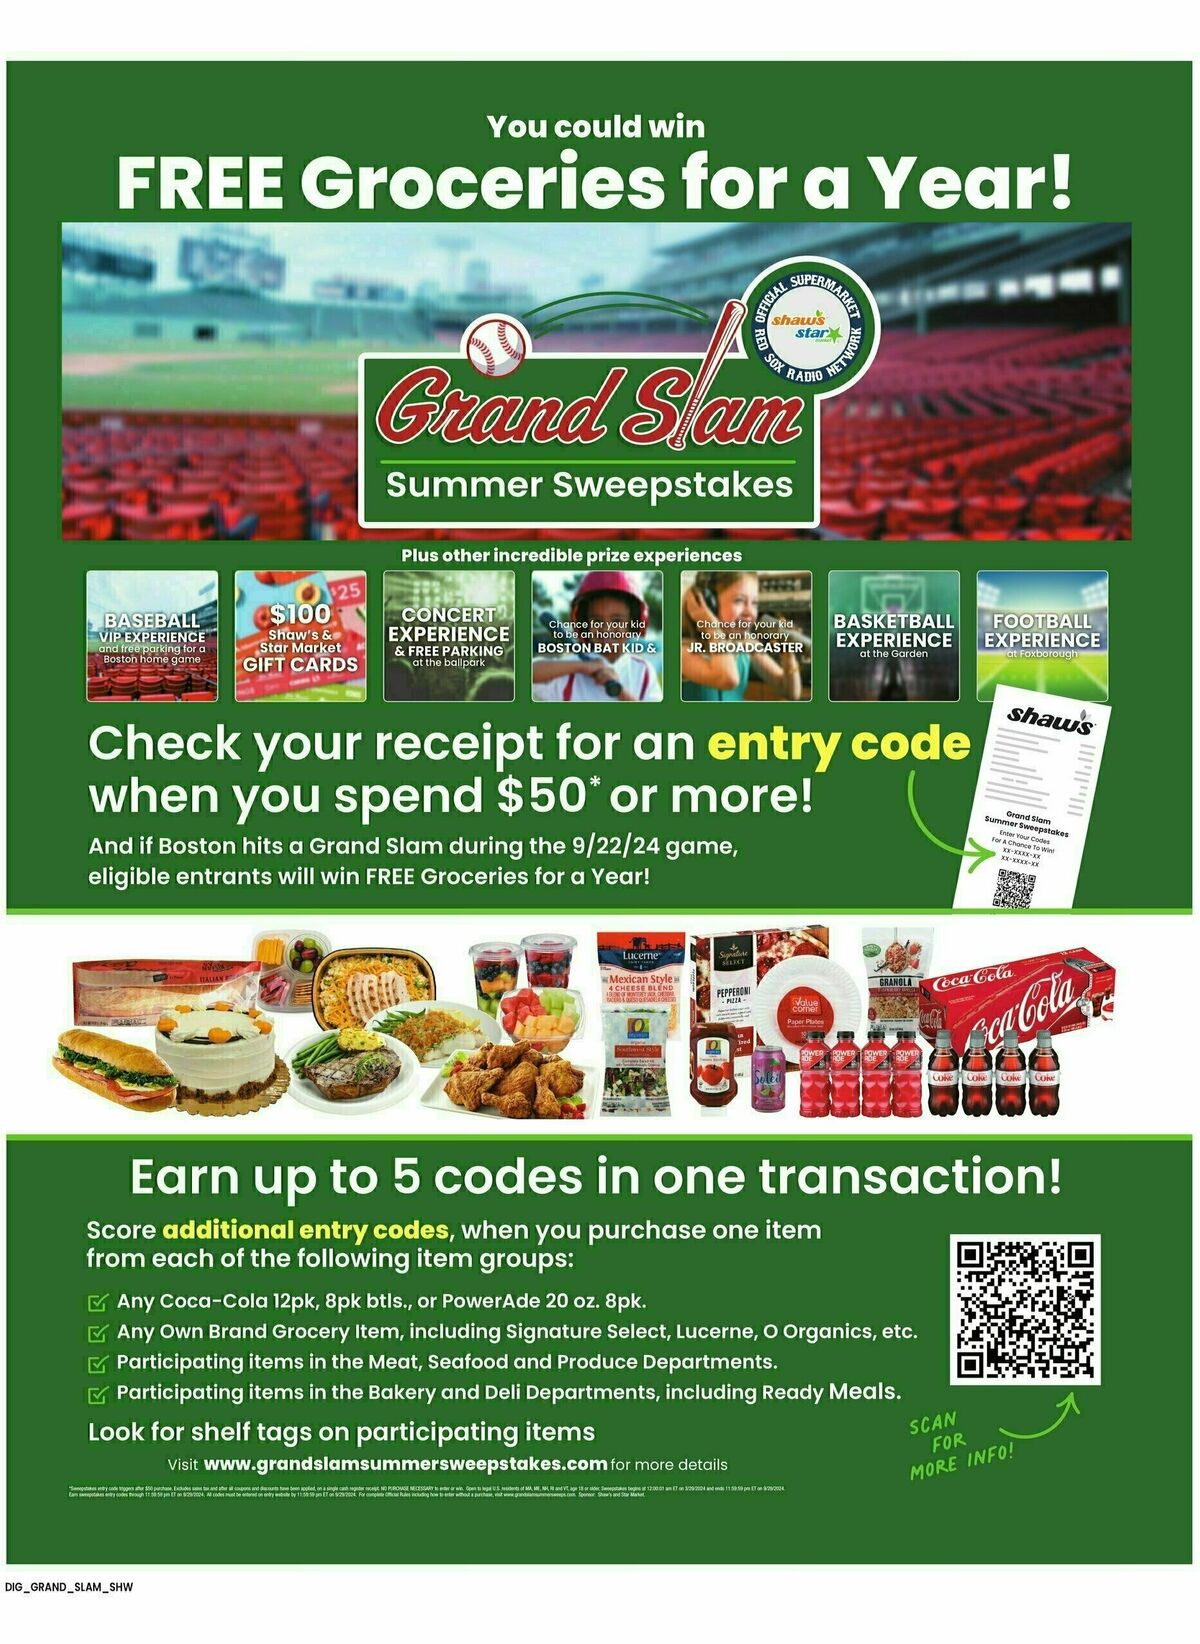 Shaw's Weekly Ad from June 28